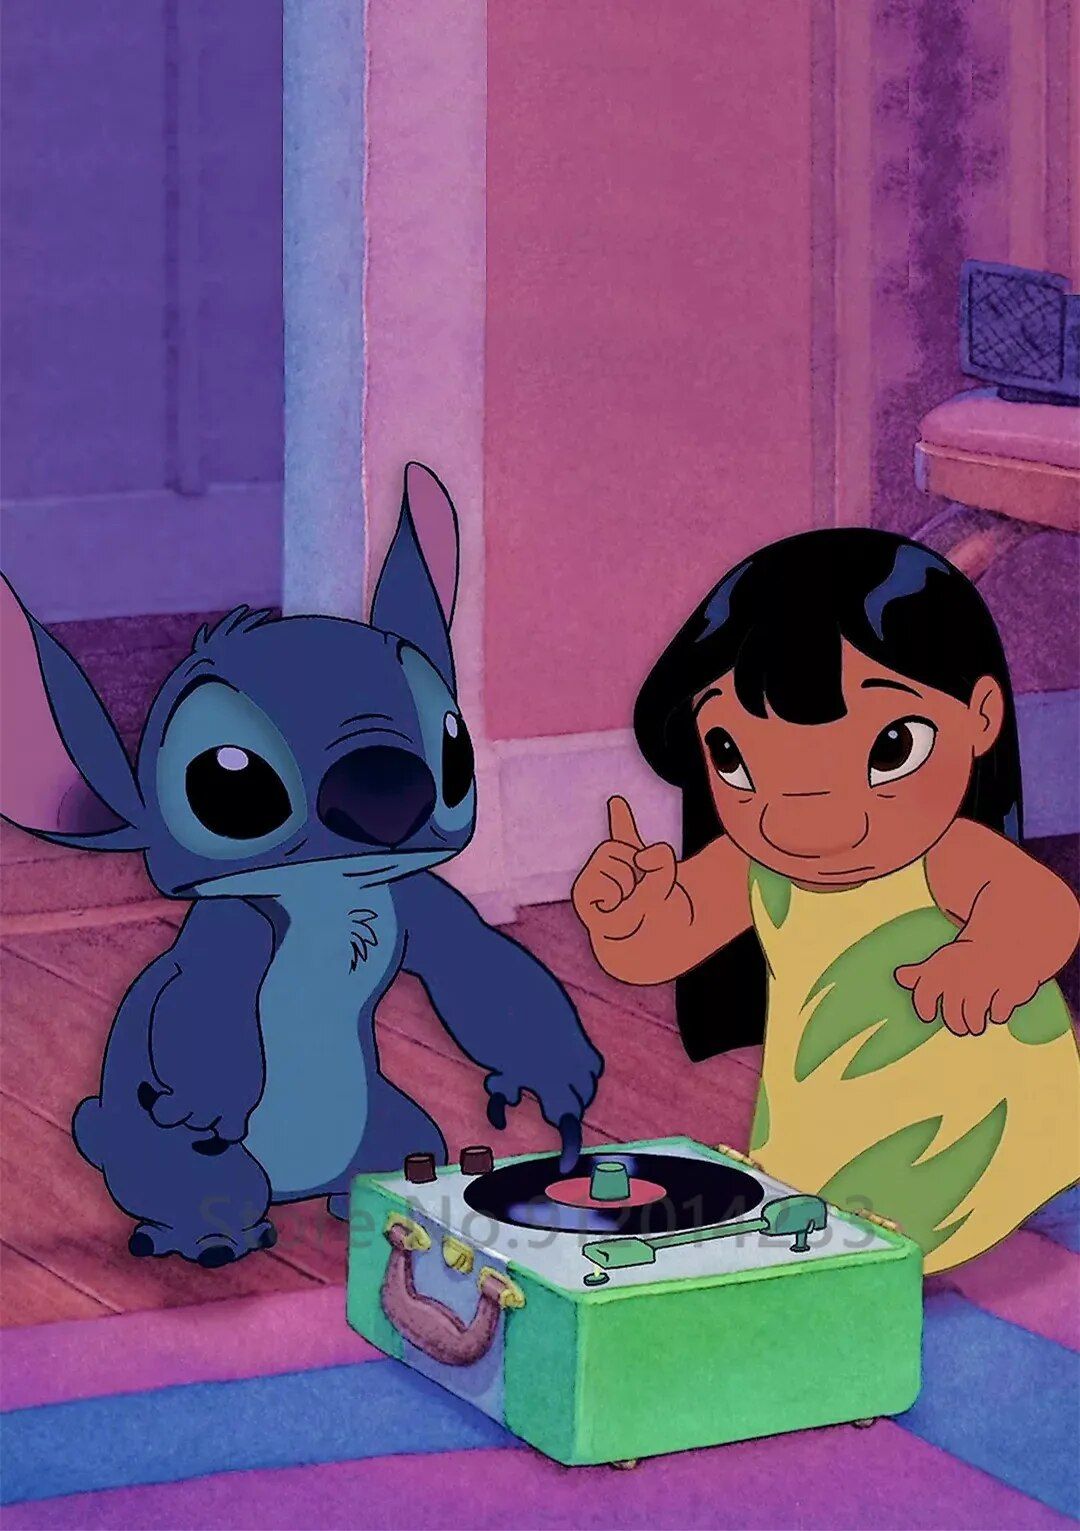 Stitch and lilo in the pink room - Stitch